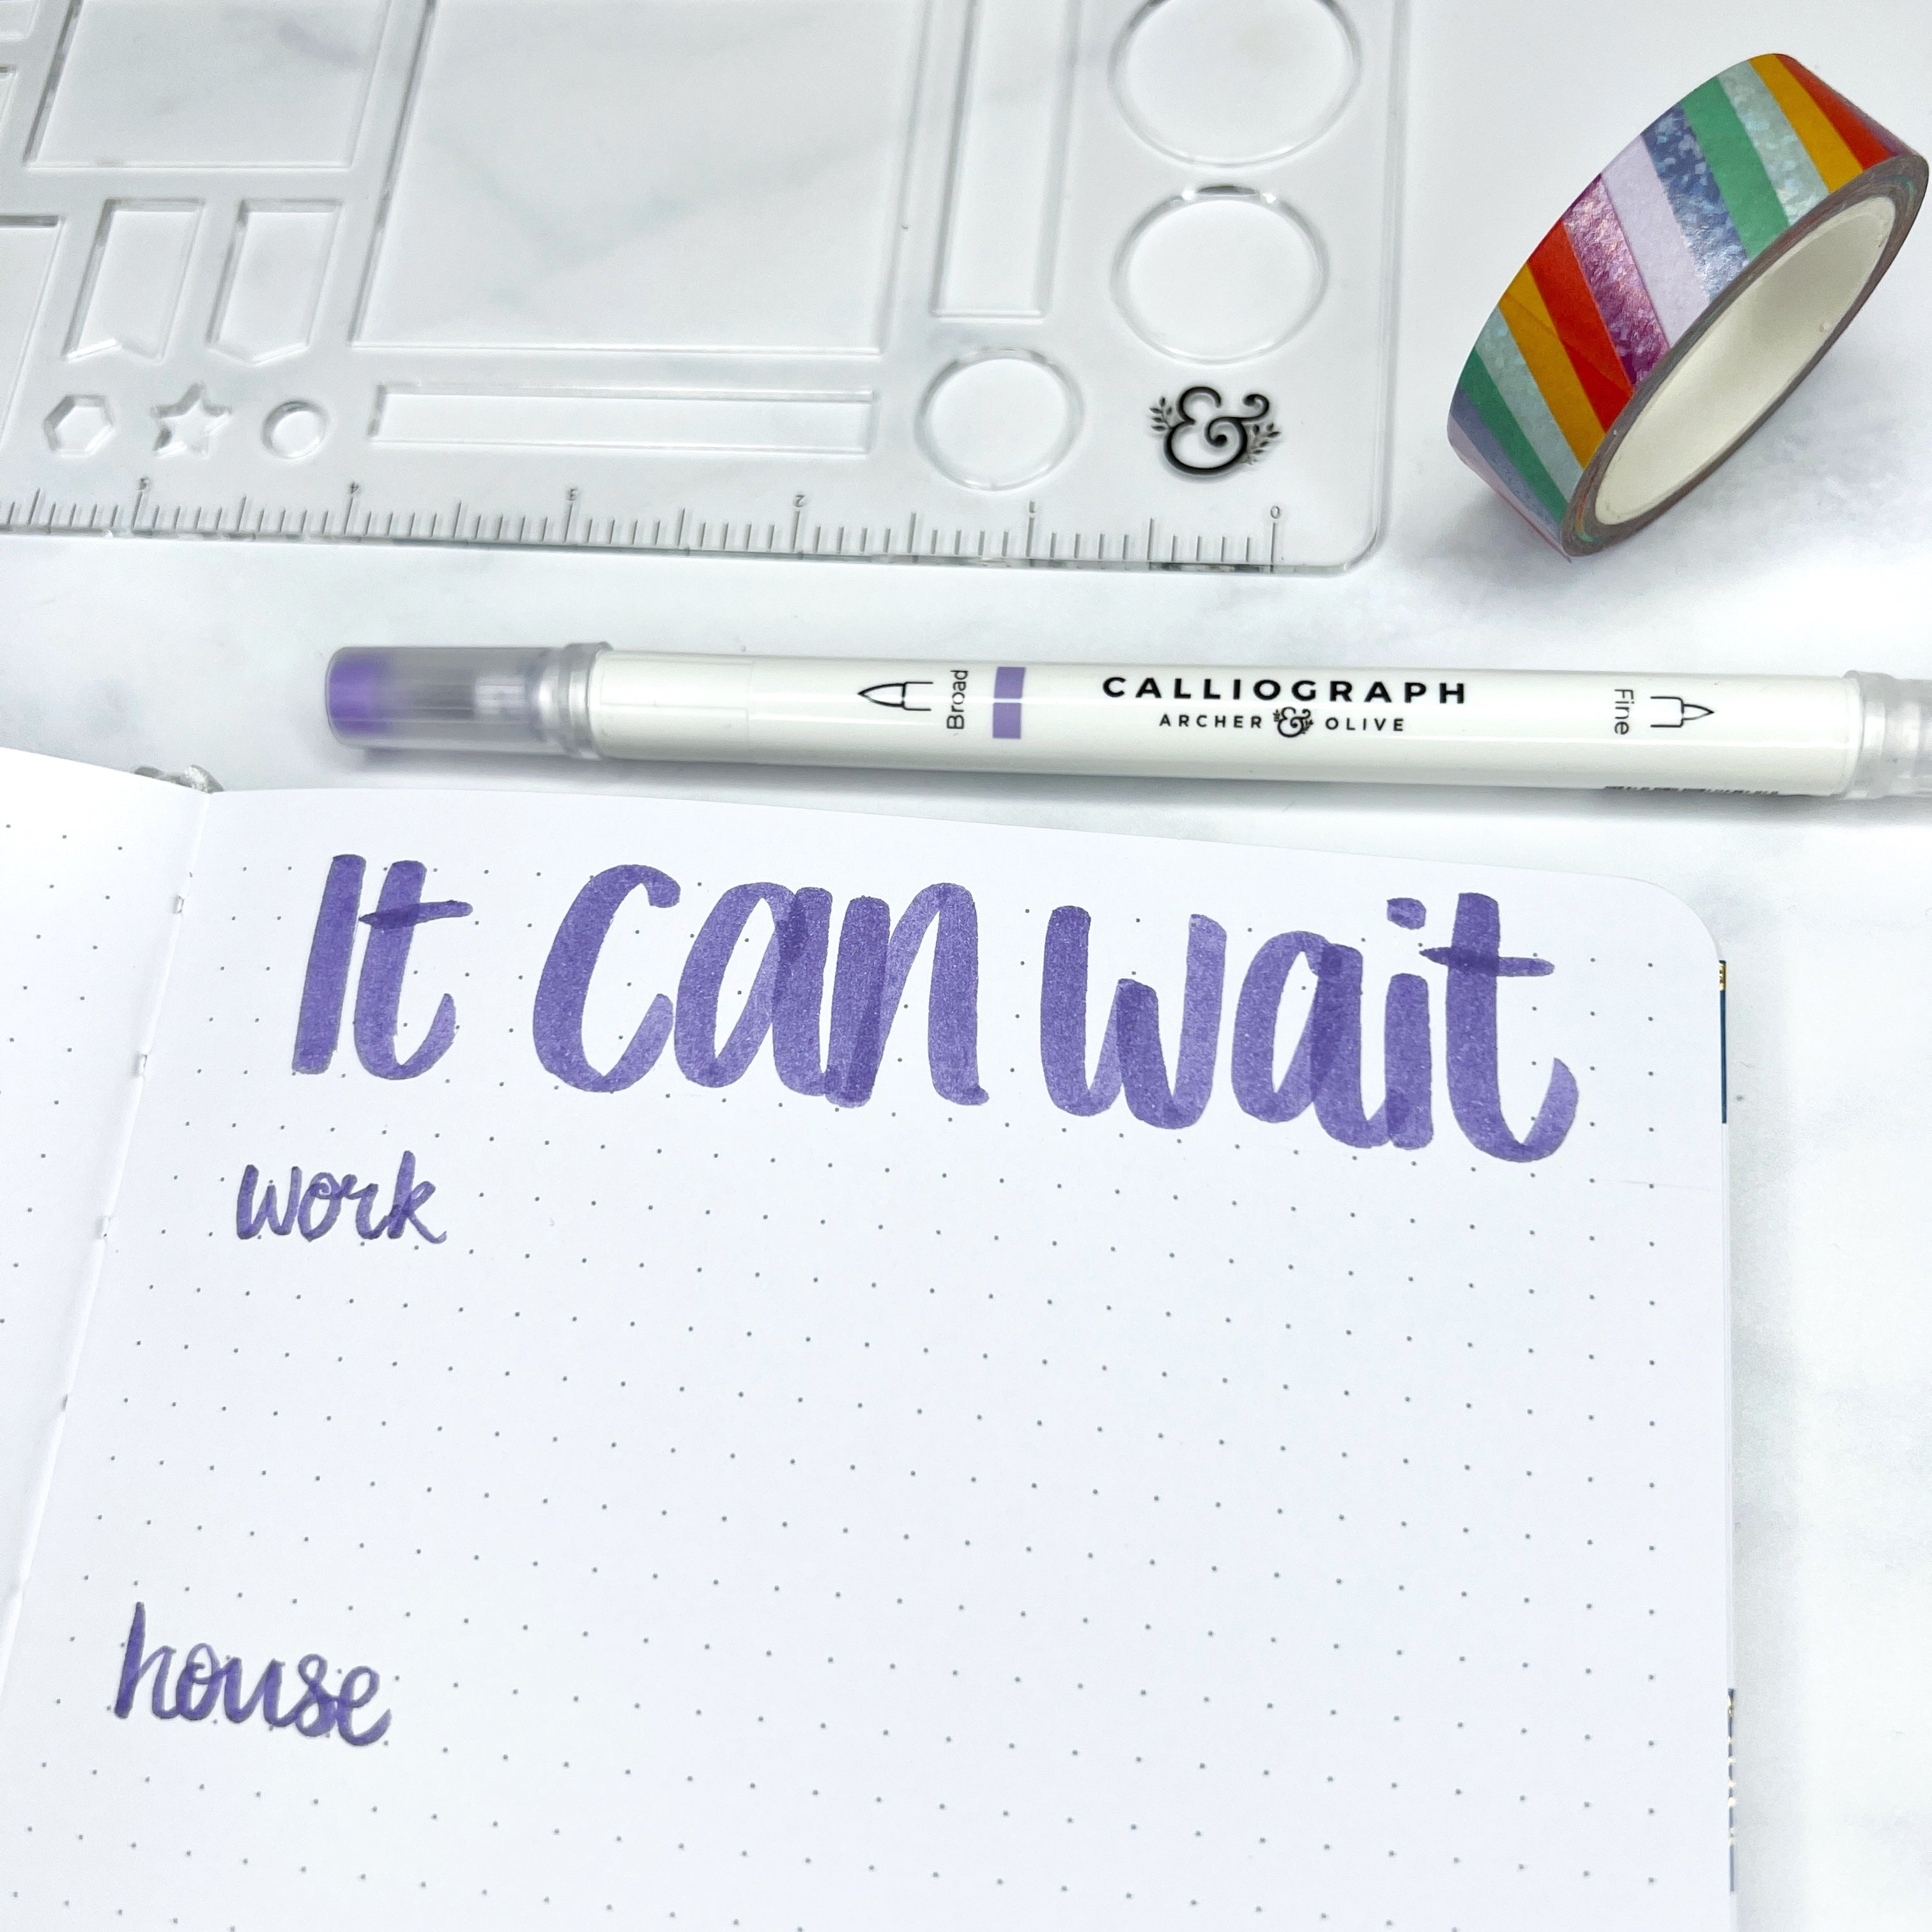 It can wait title on page with subheadings below (work, house) plus washi and pen